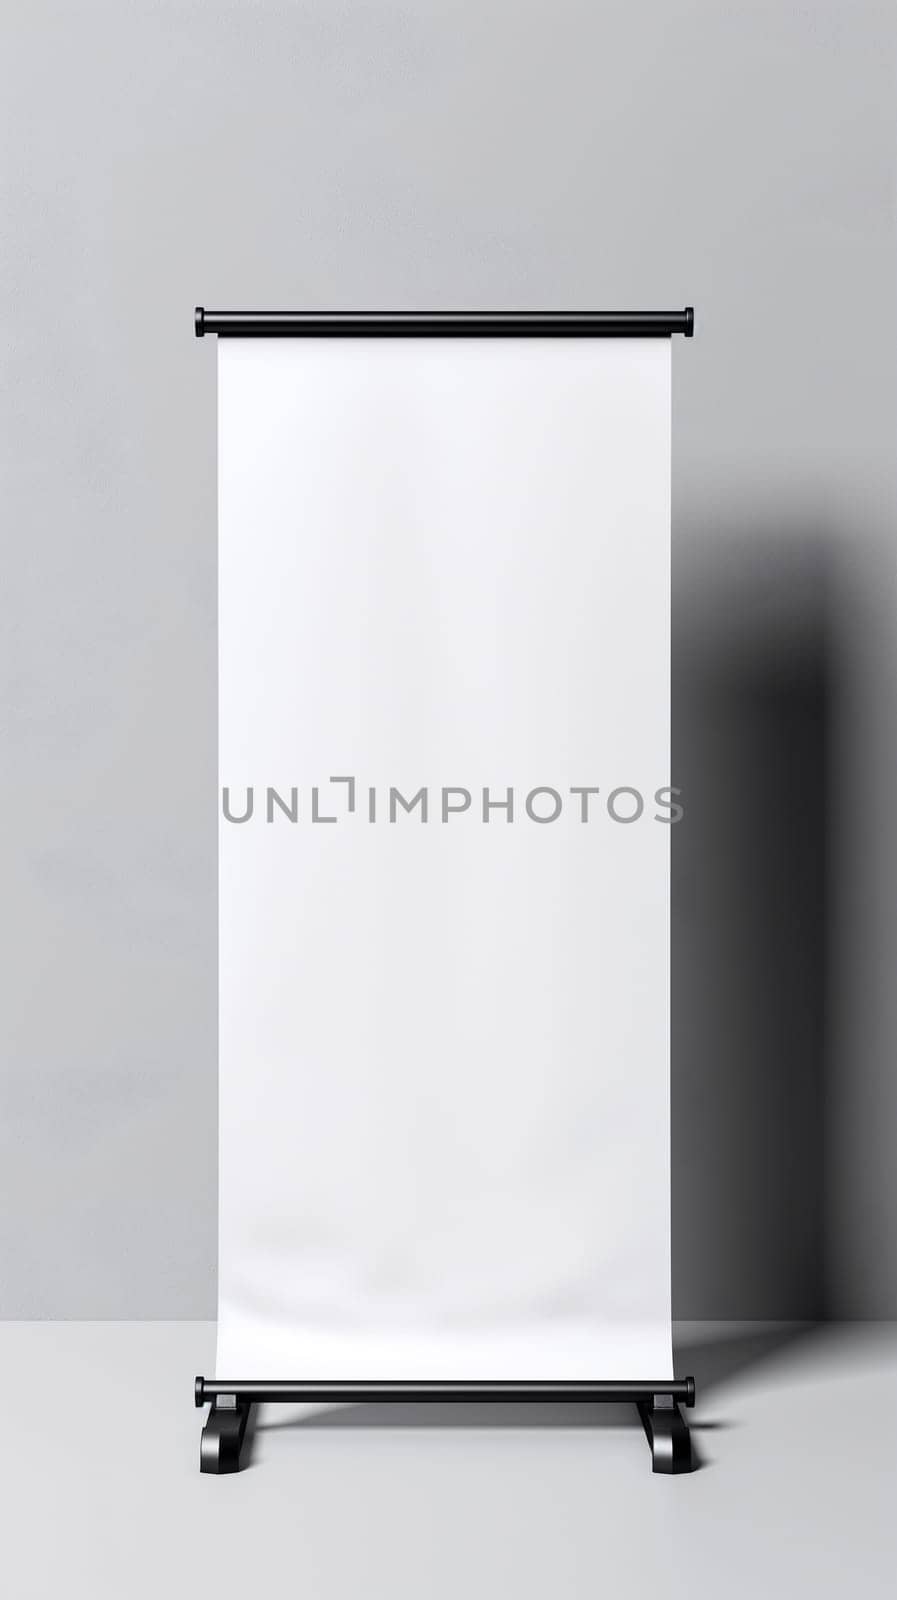 Blank White Banner Stand Ready for Branding in a Neutral Setting by chrisroll